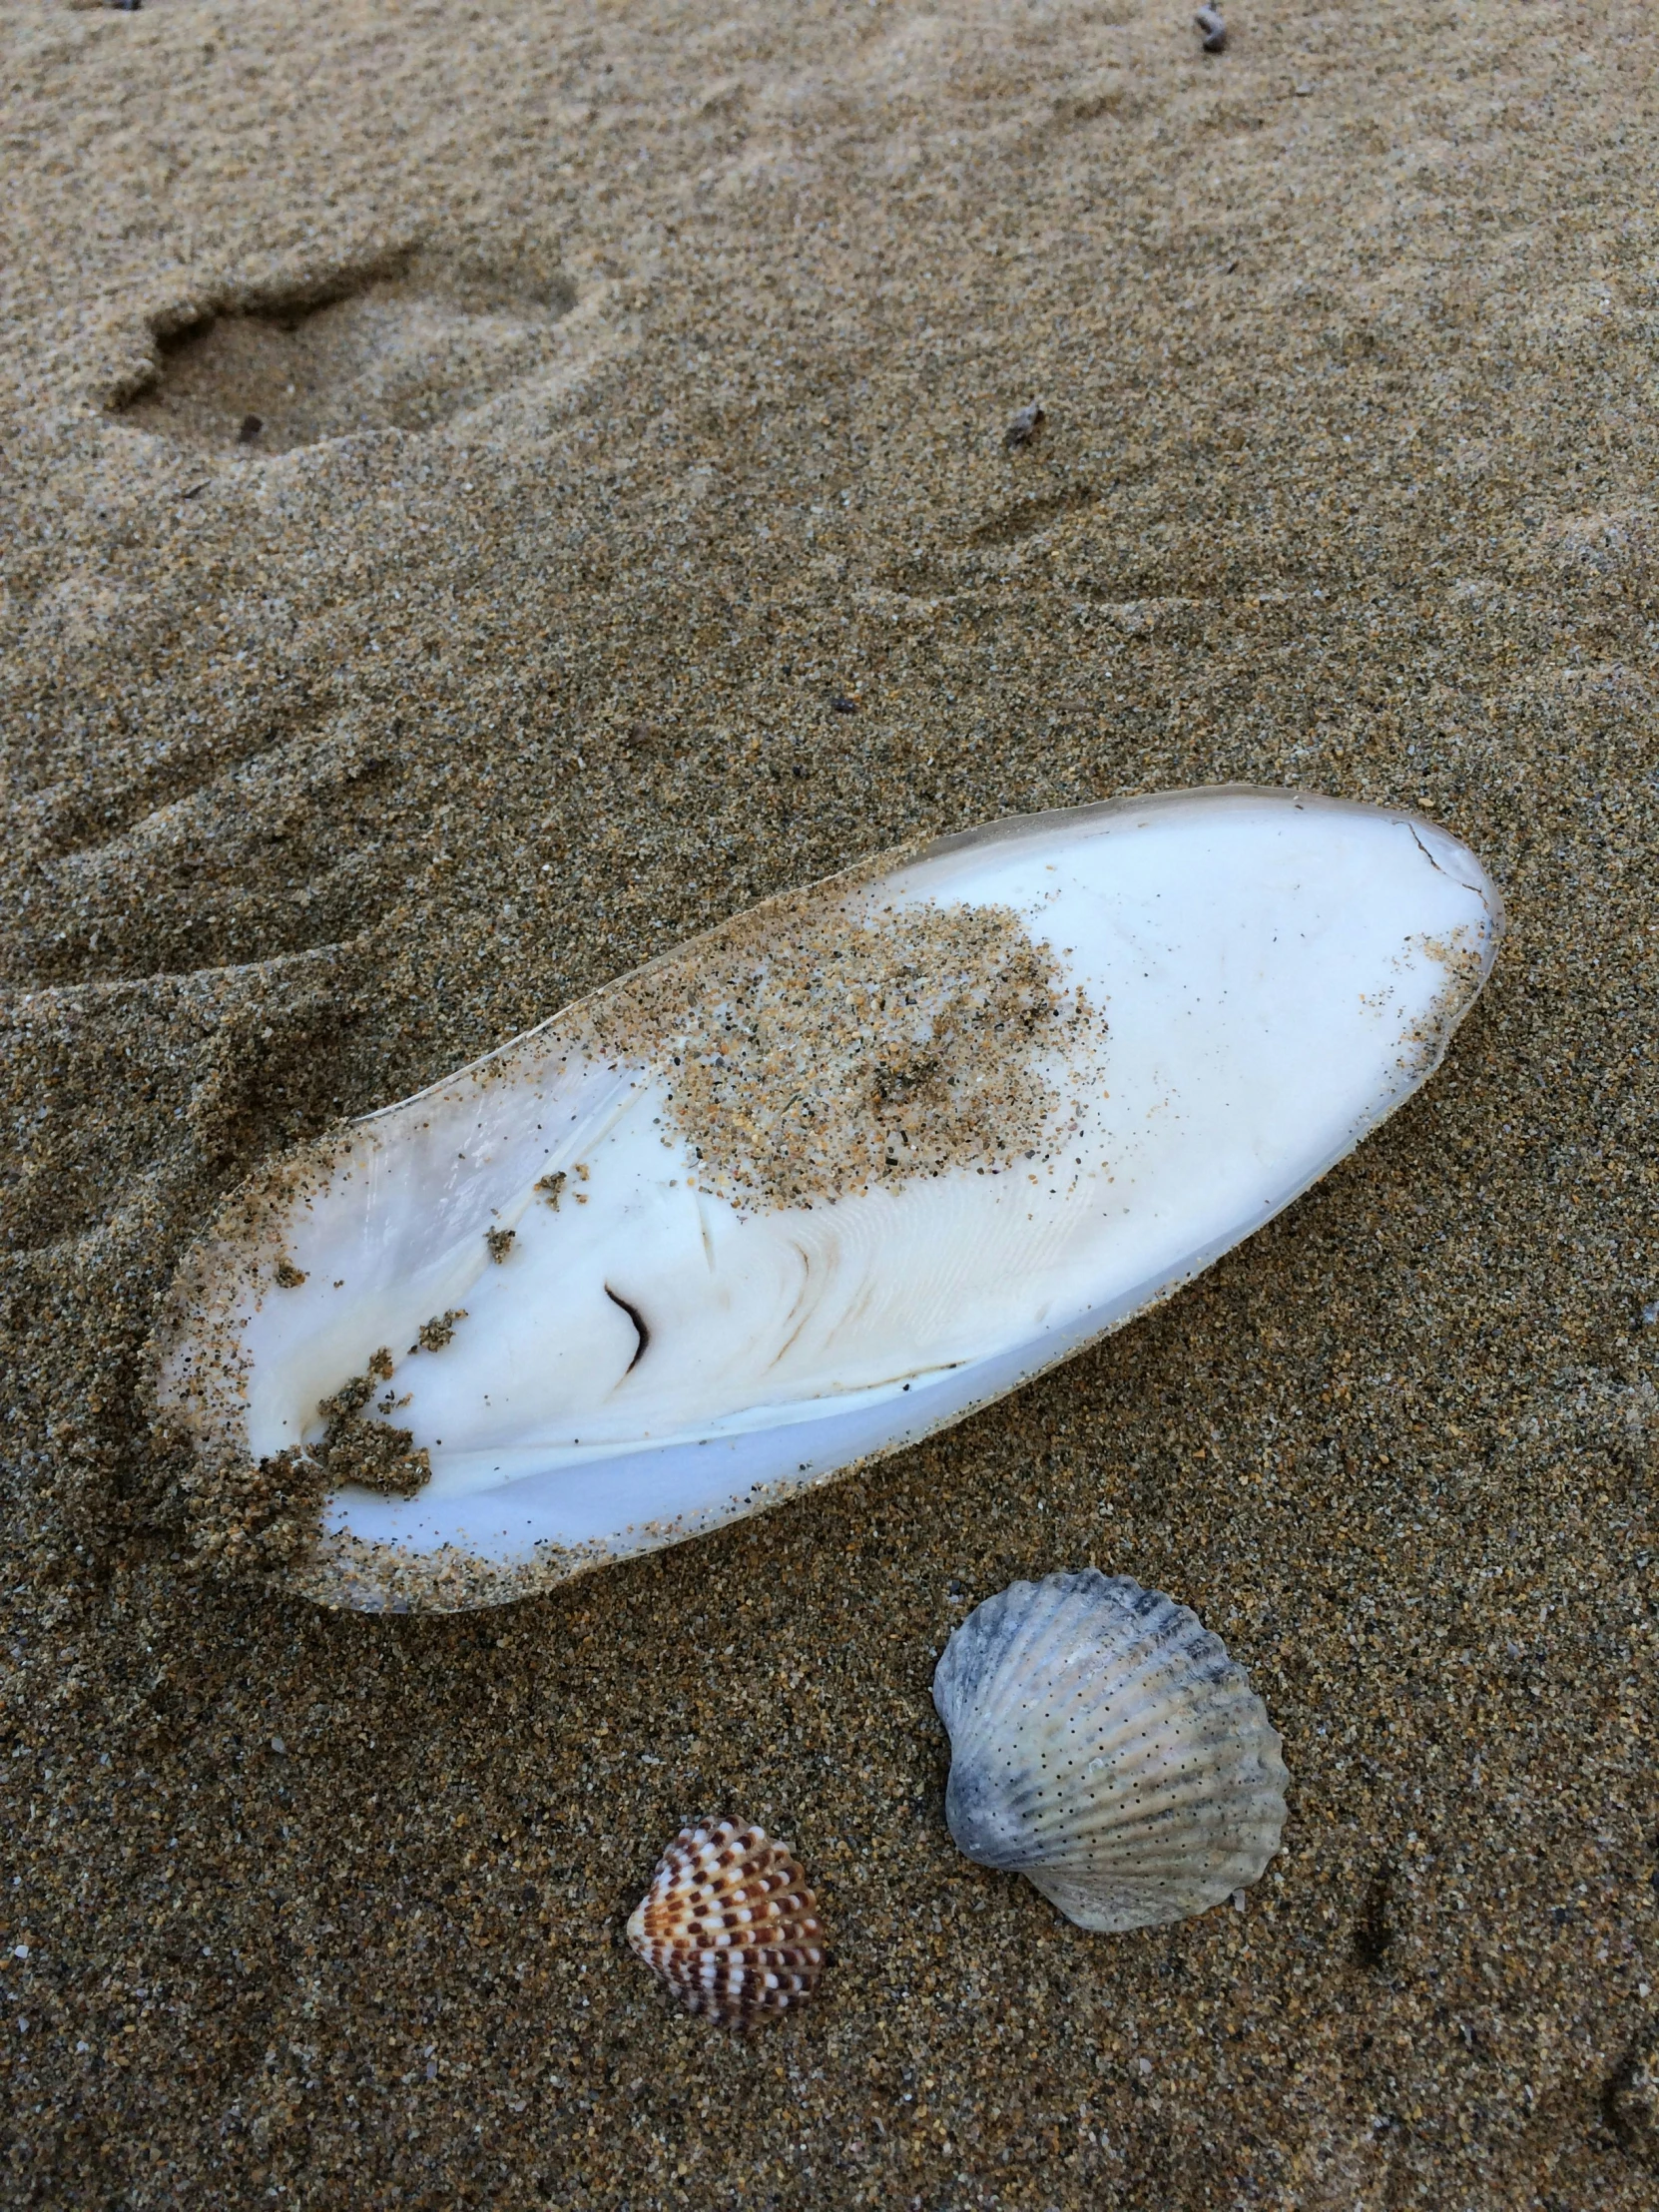 a broken surfboard sits on the sand by some seashells